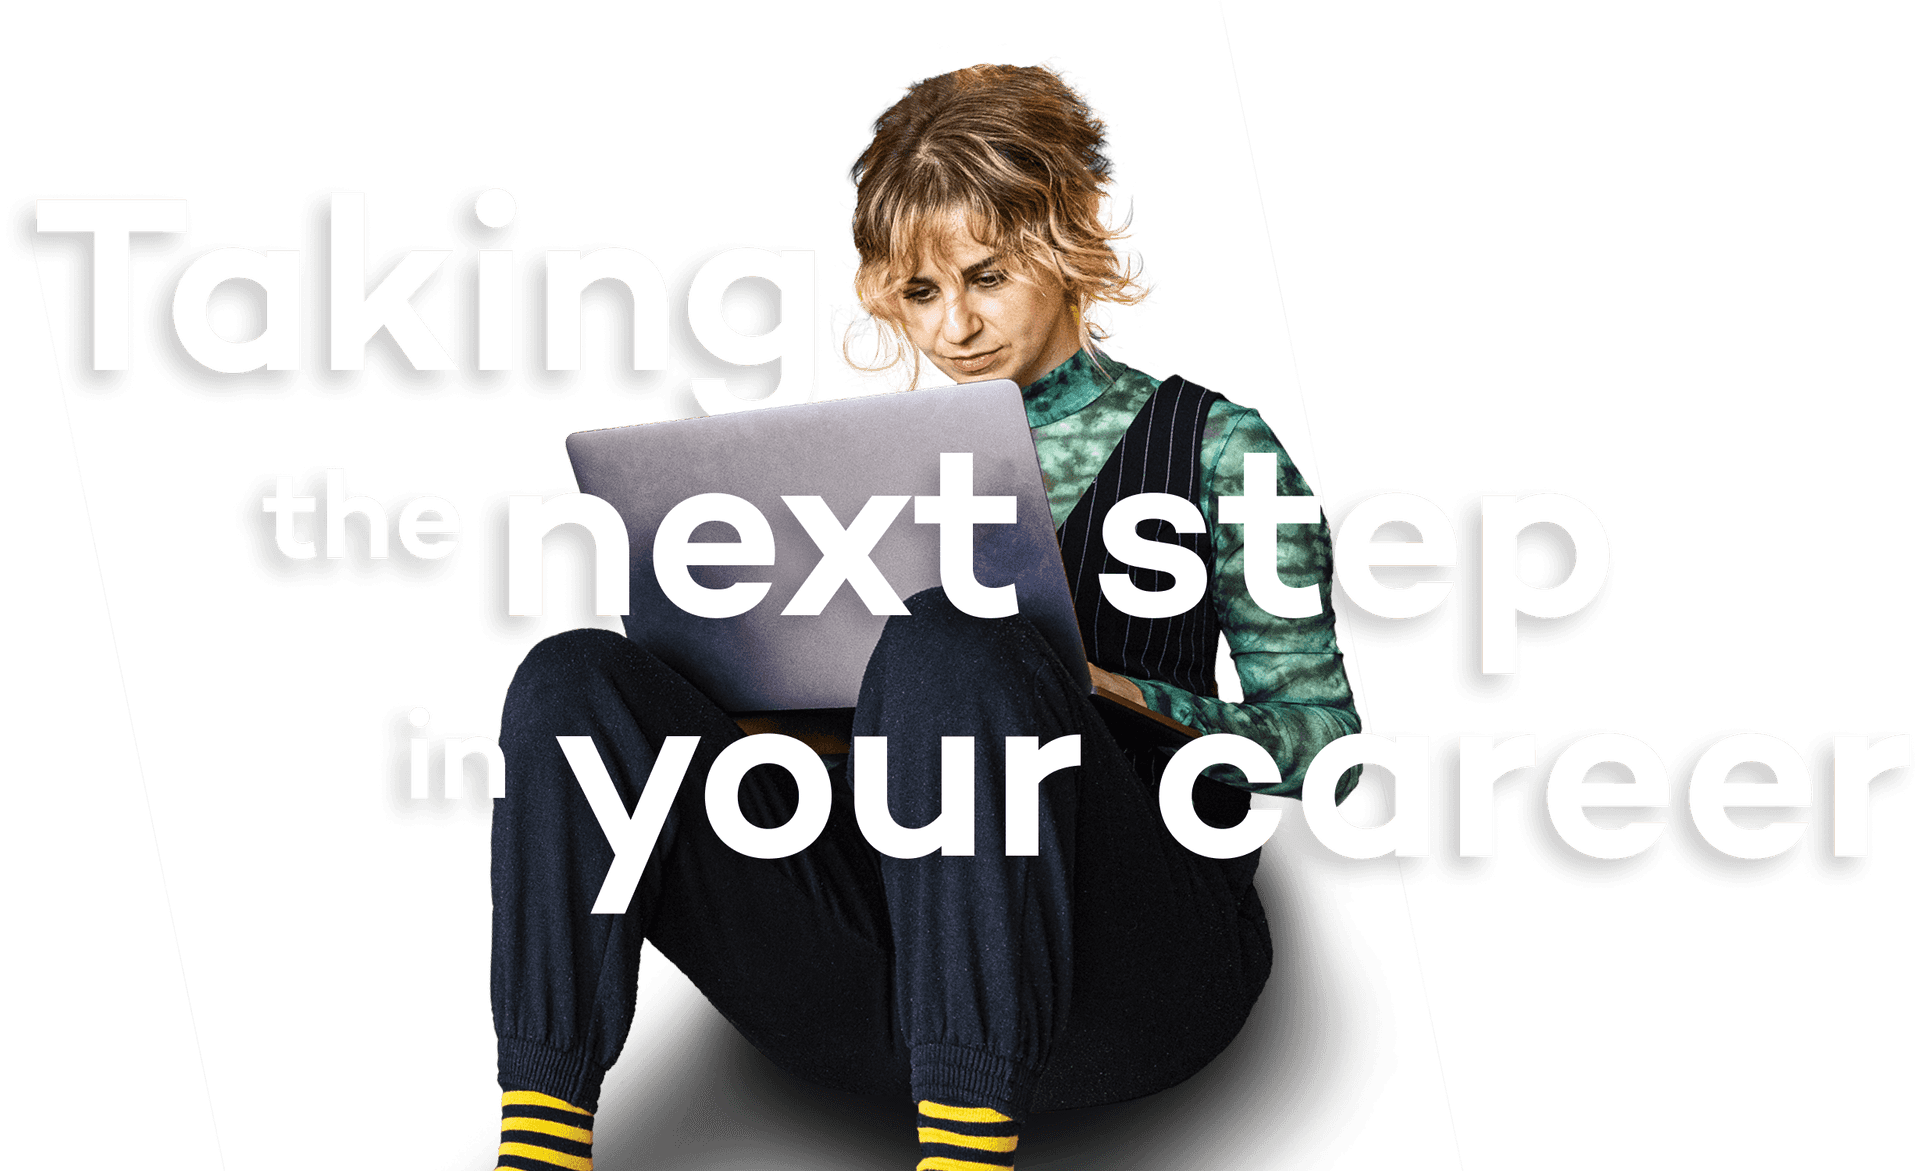 Taking the next step in your career